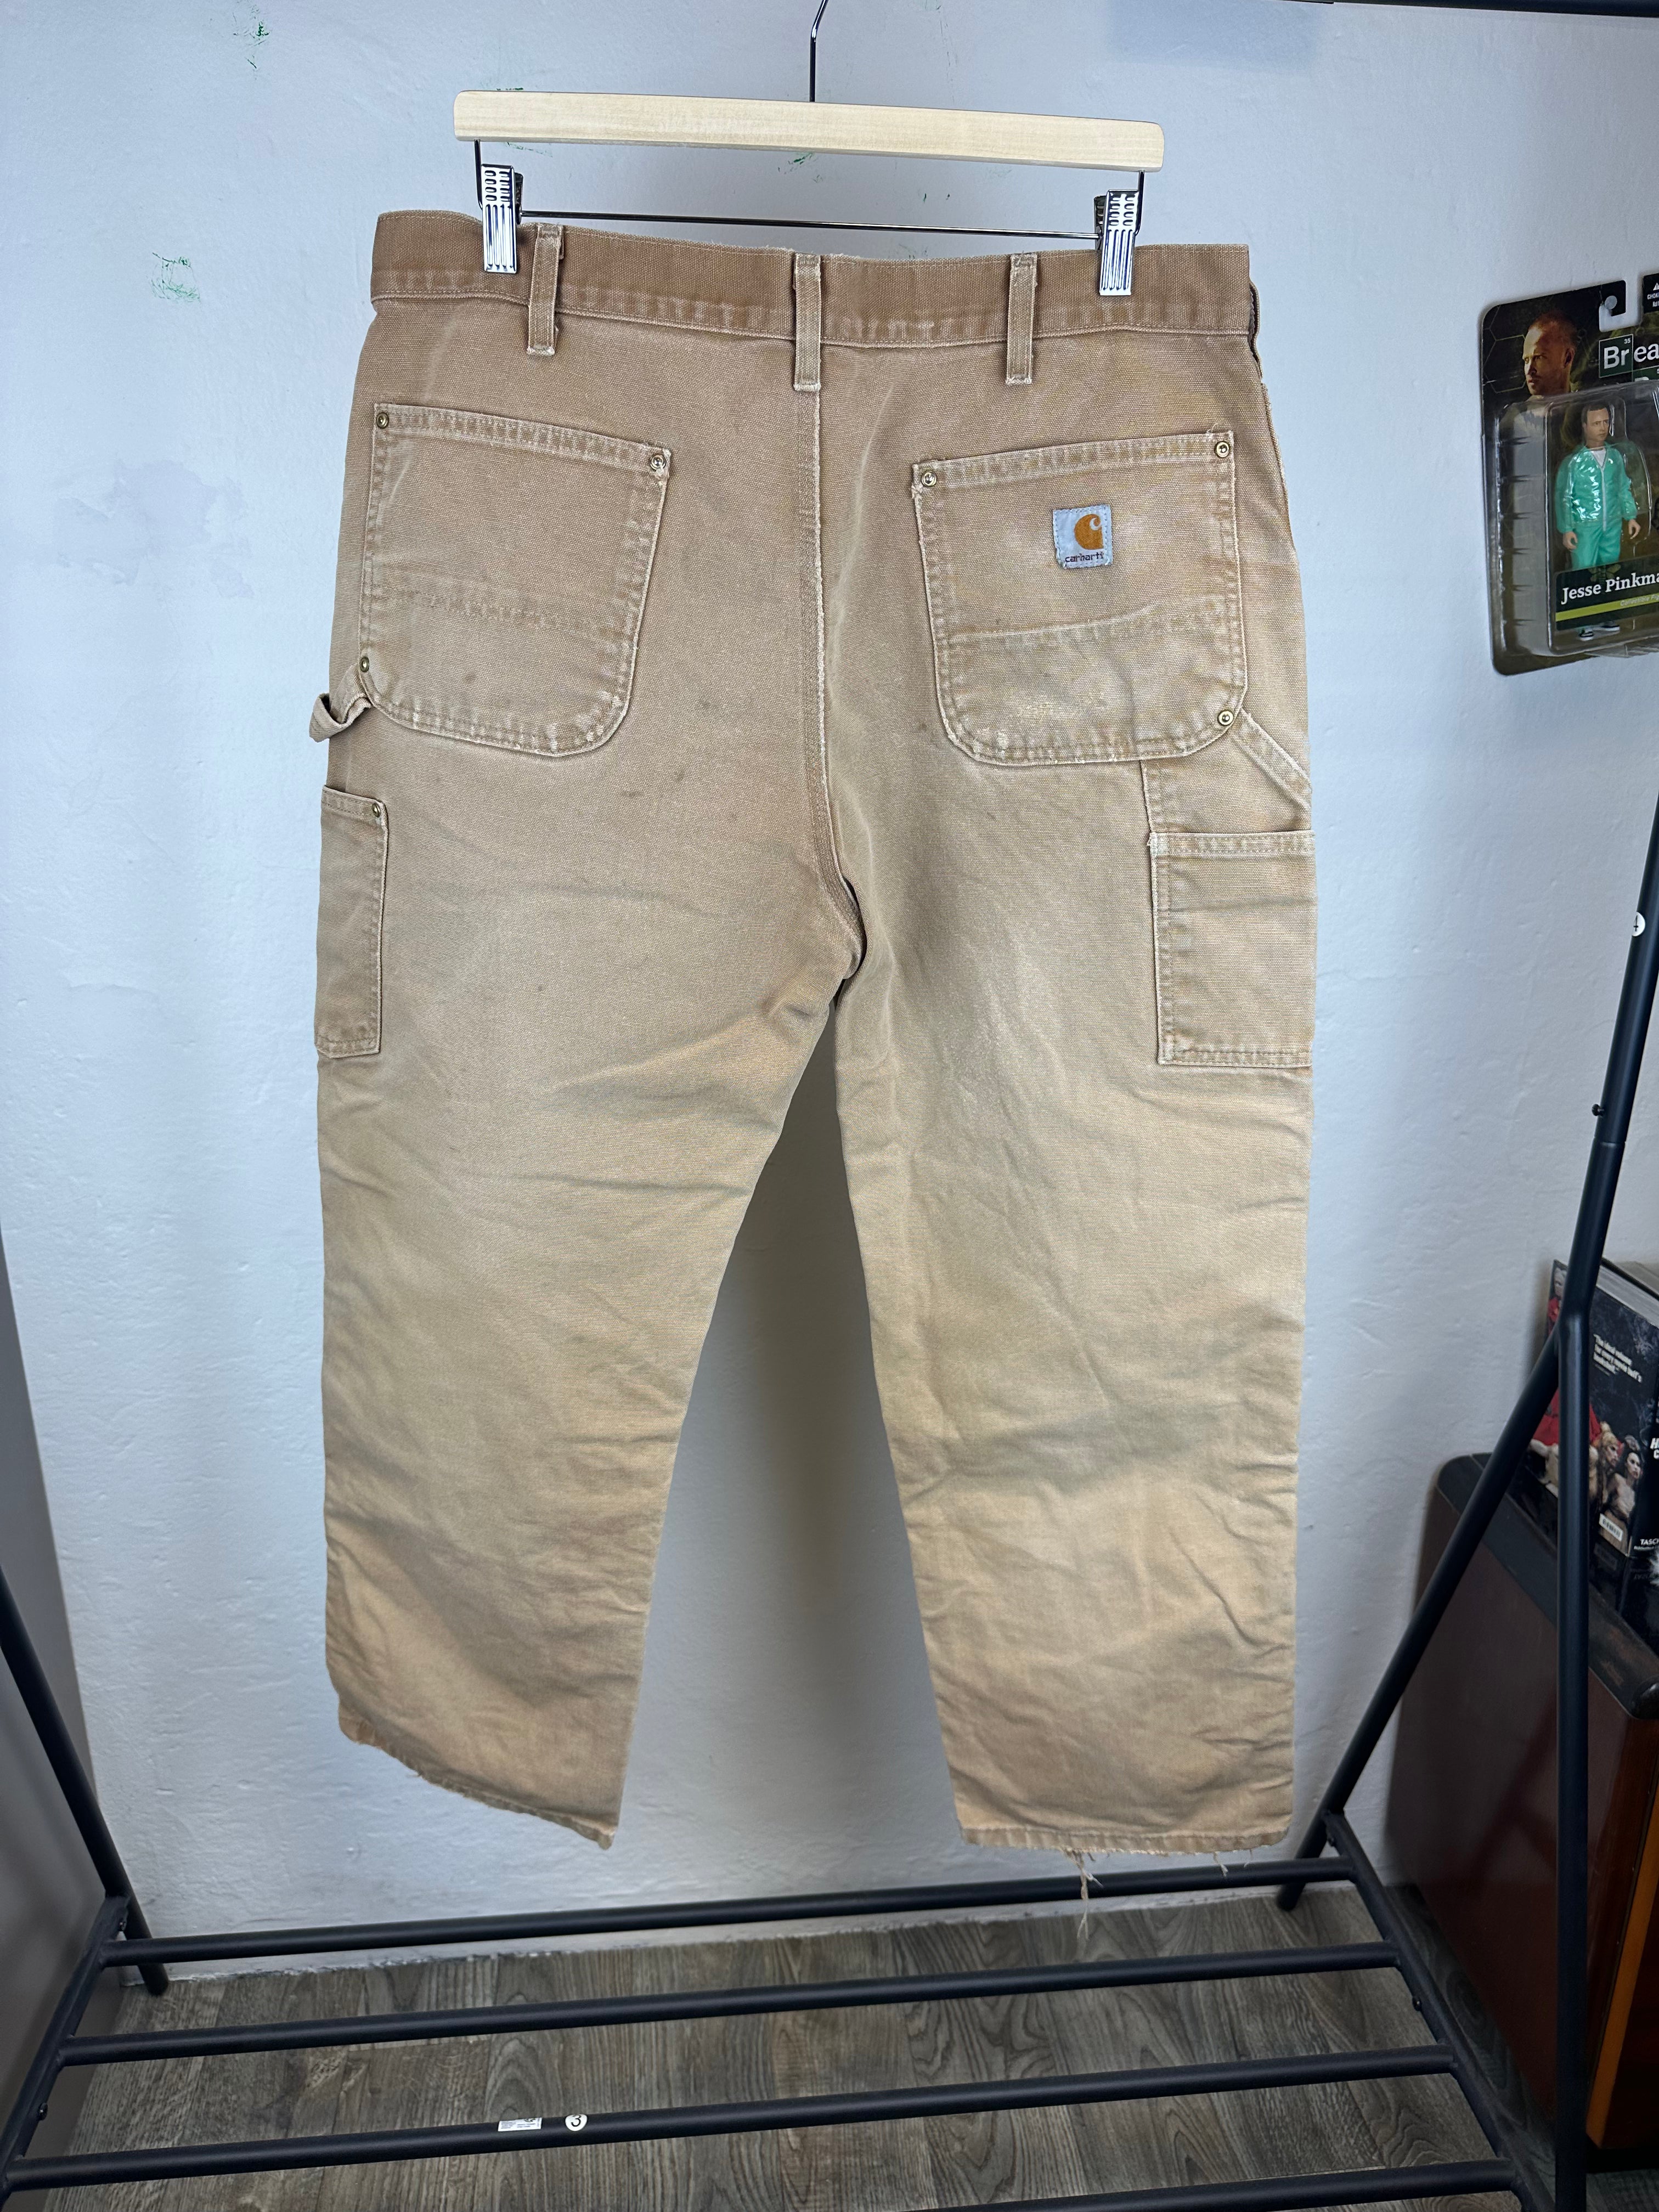 Vintage Carhartt Faded Double Knees - size 38x30